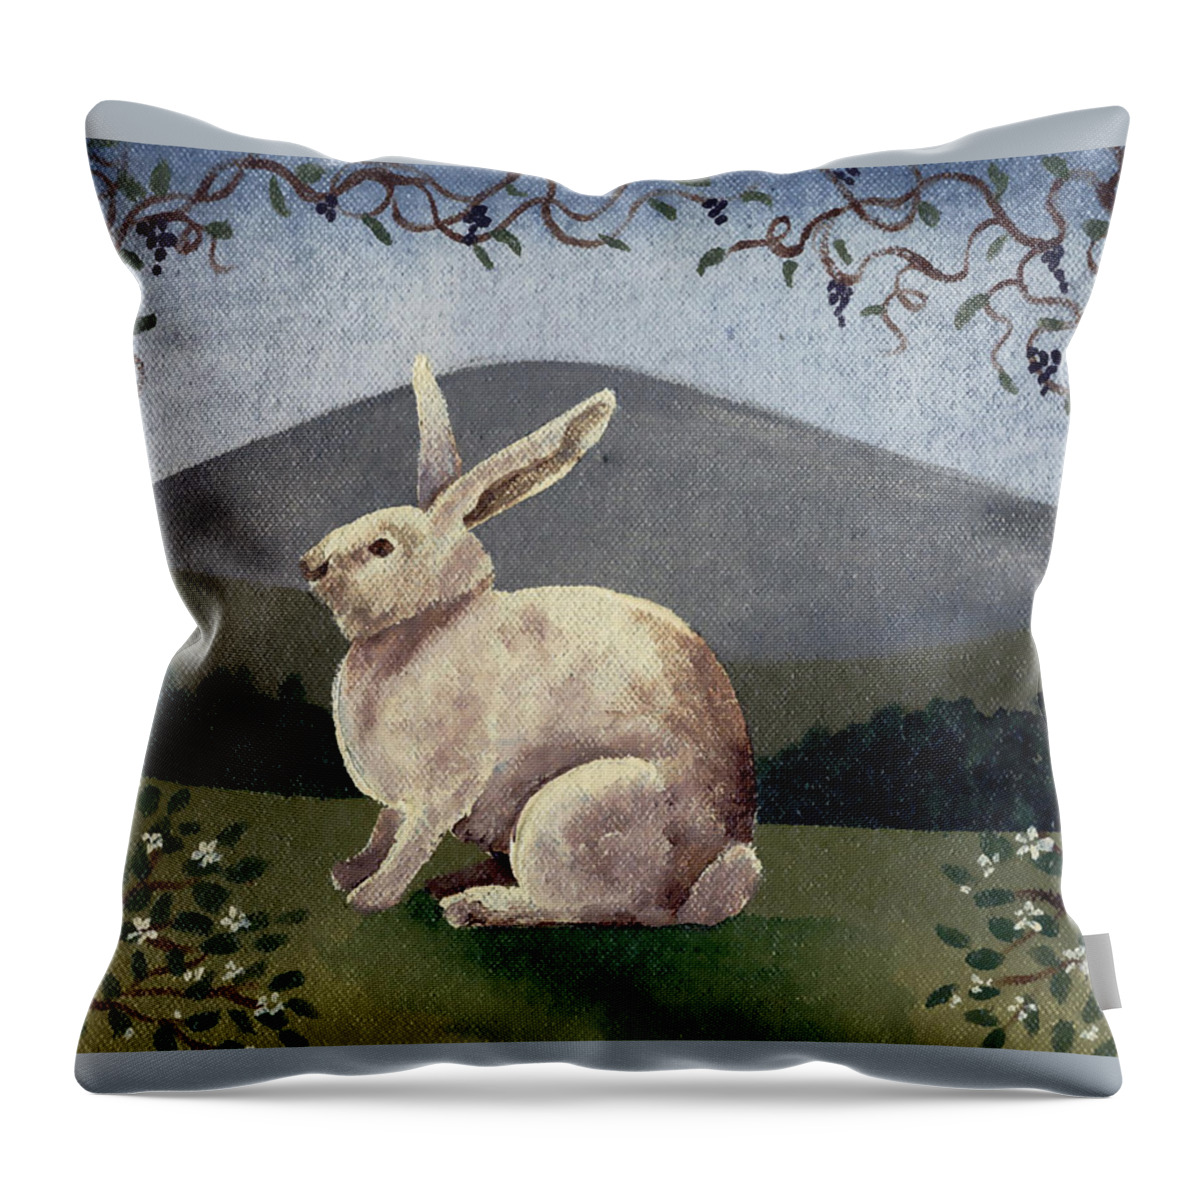 Rabbit Throw Pillow featuring the painting White Rabbit by Lisa Curry Mair